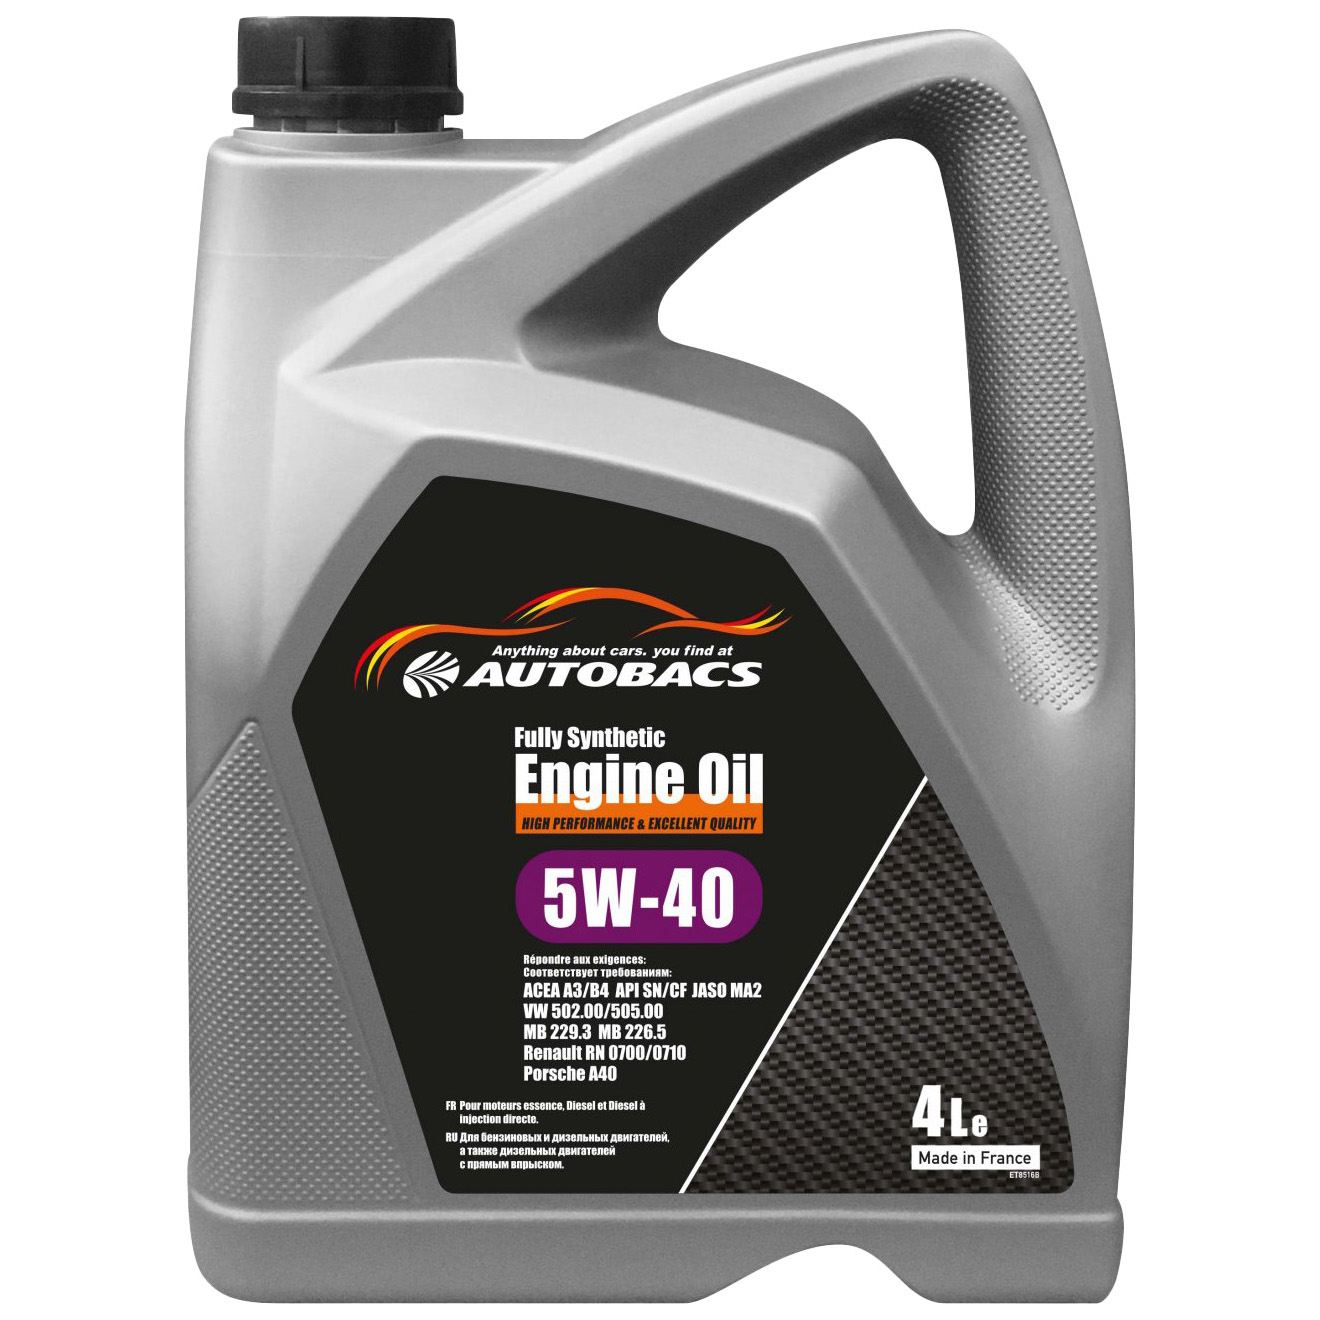 Autobacs масло моторное autobacs fully synthetic 5w40 acea a3/b4 api sn .